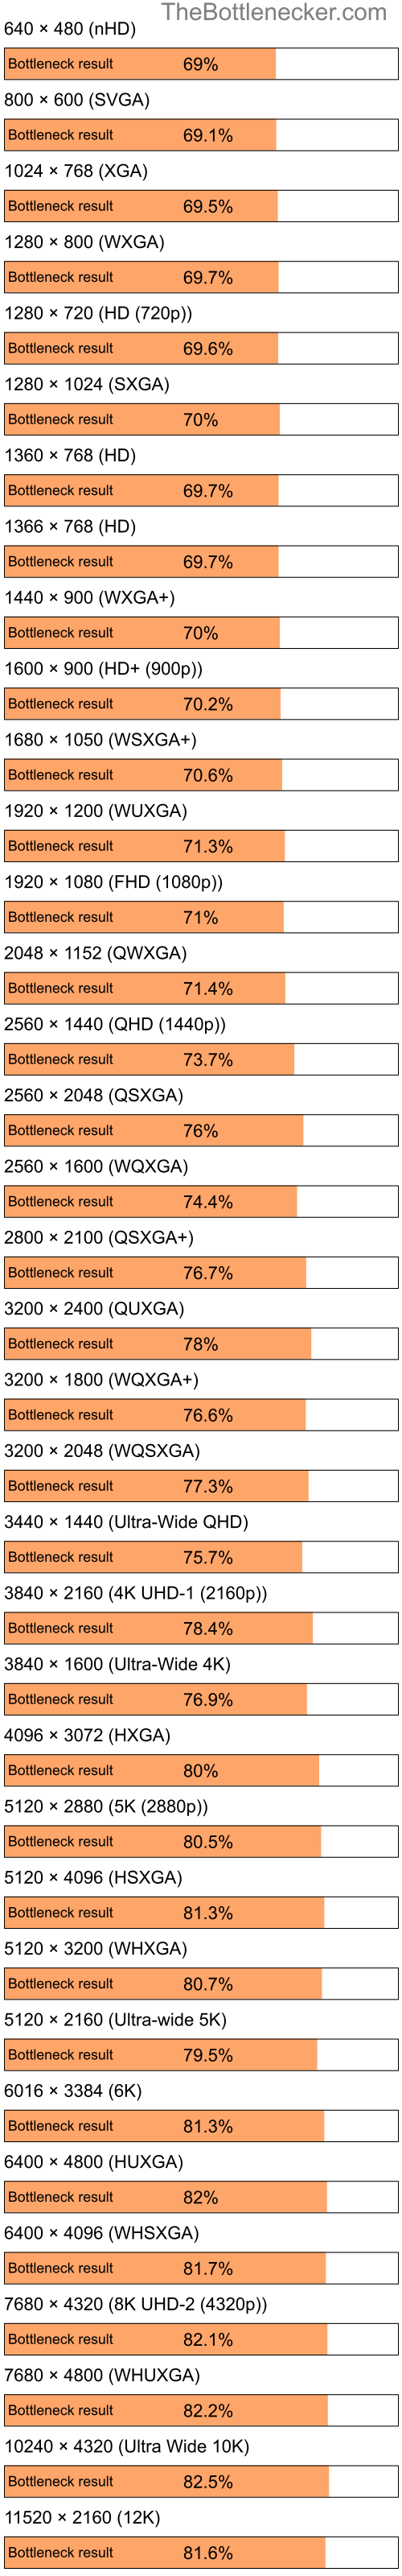 Bottleneck results by resolution for Intel Pentium 4 and NVIDIA GeForce 6200 TurboCache in General Tasks